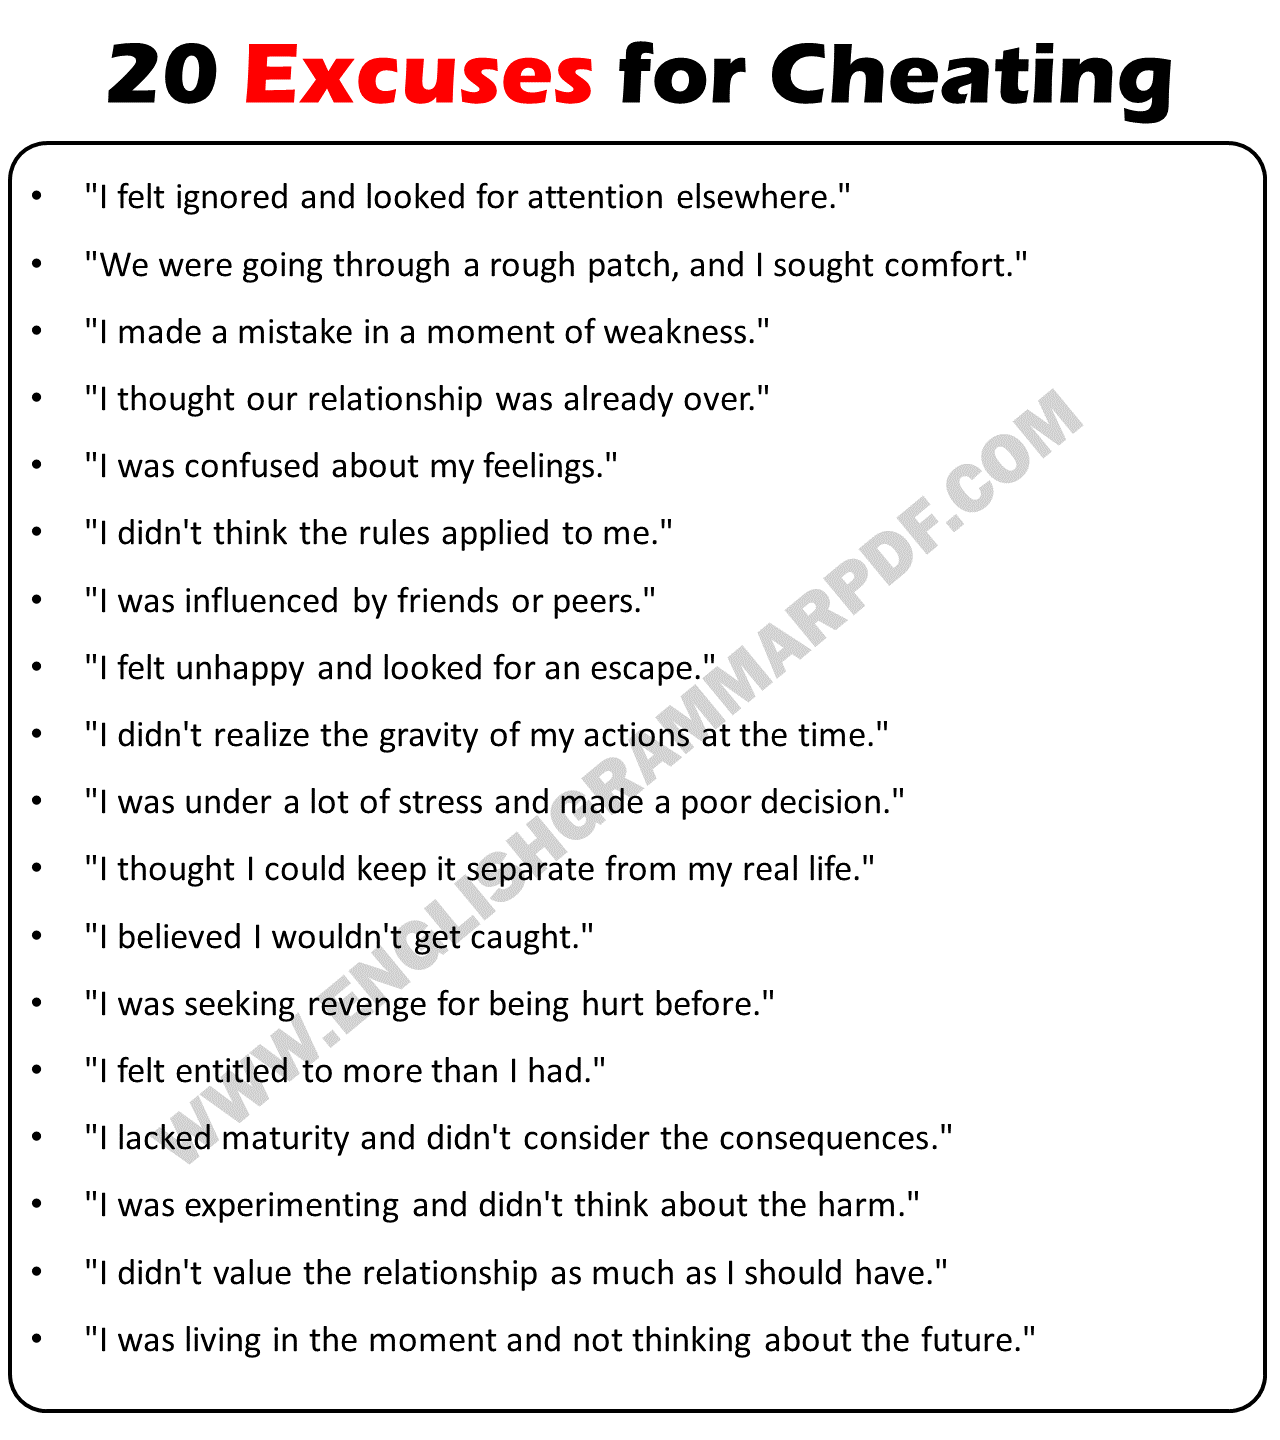 20 Excuses for Cheating